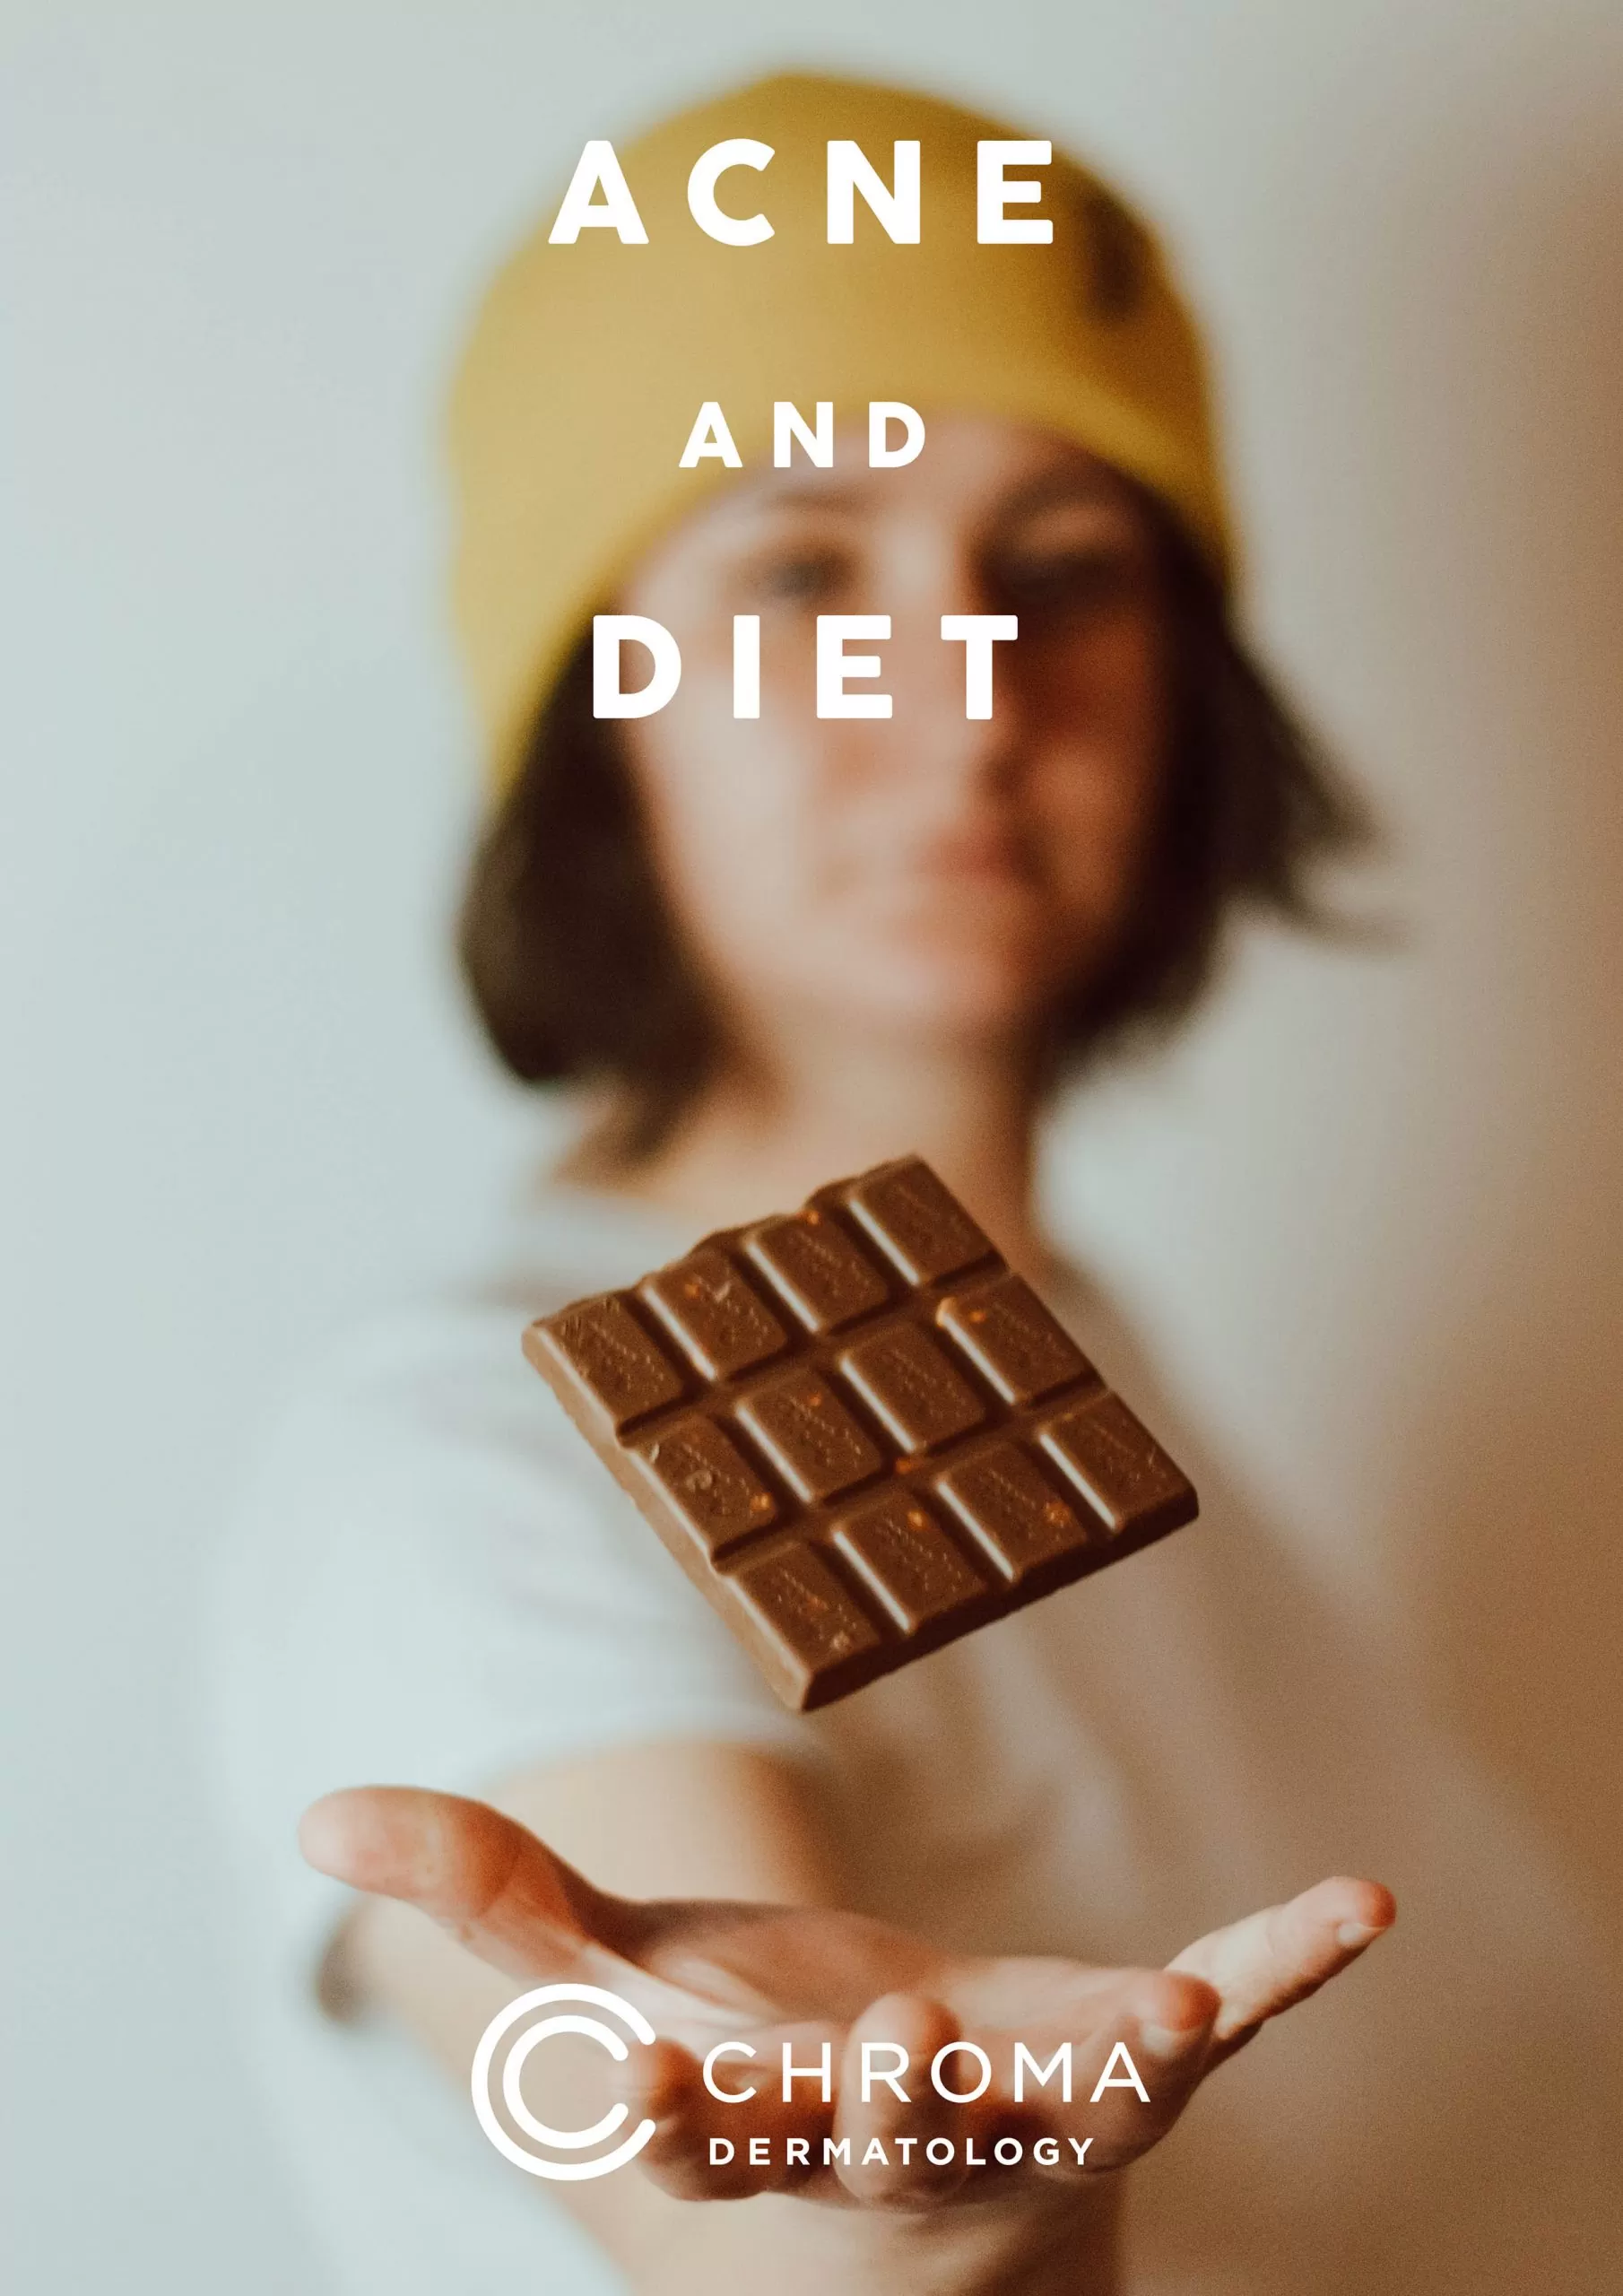 Acne And Chocolate On Diet